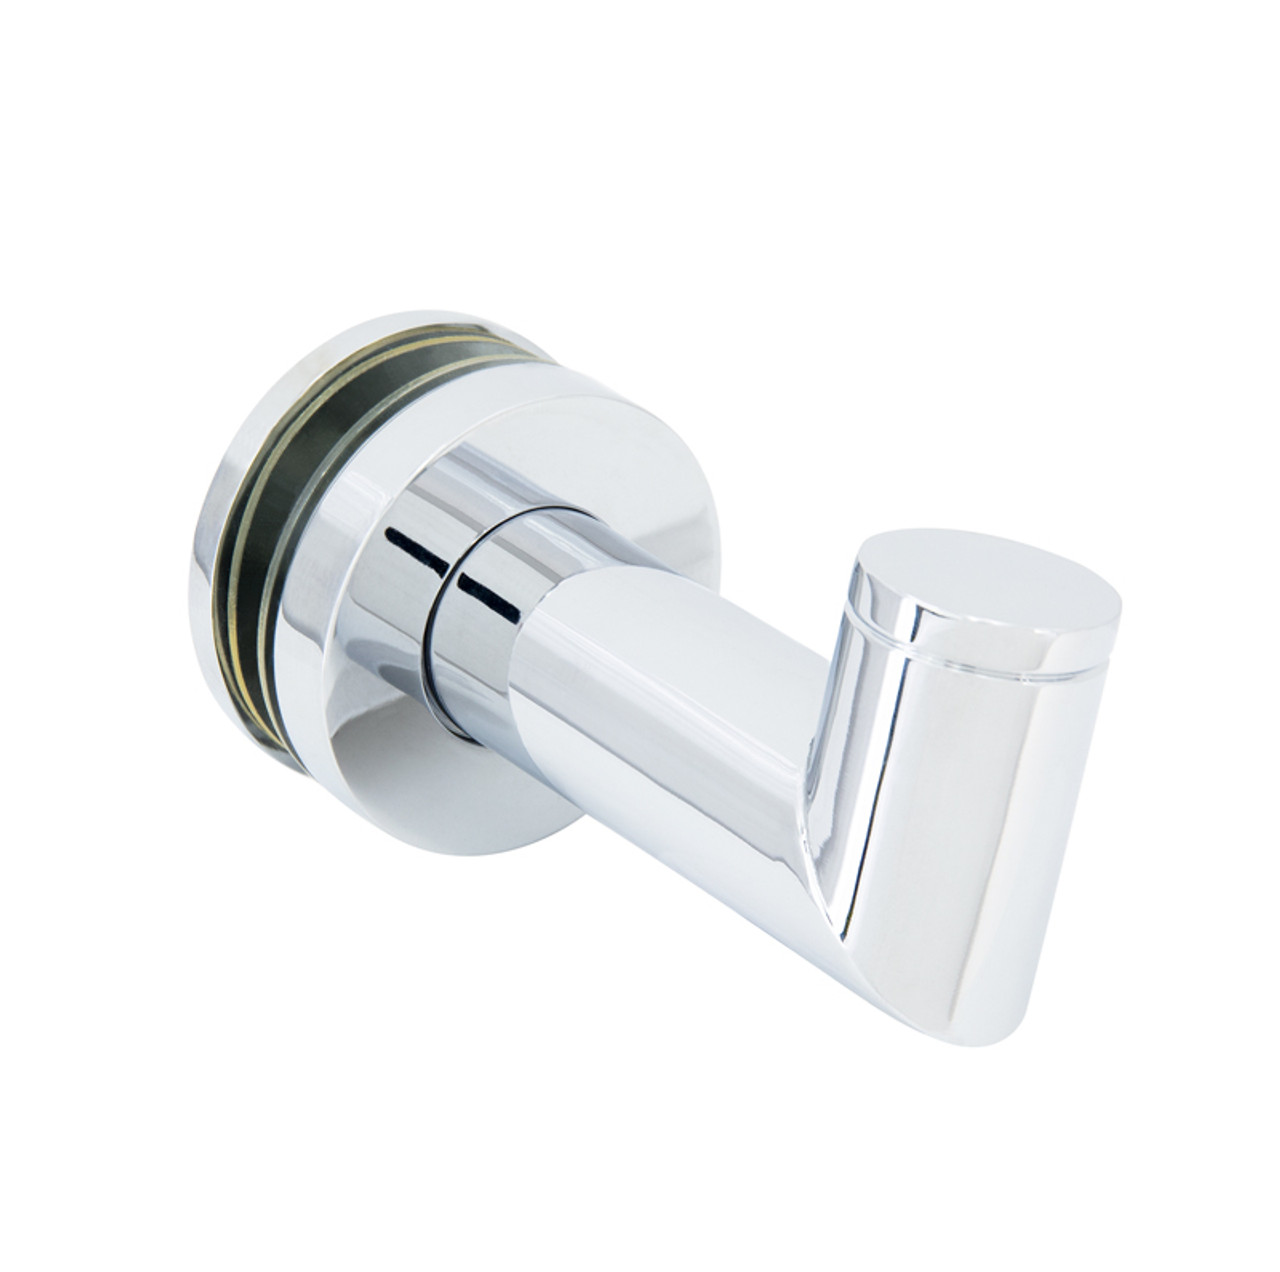 FHC, RH1 Thru-Glass Towel/Robe Hook For 3/8 and 1/2 Glass